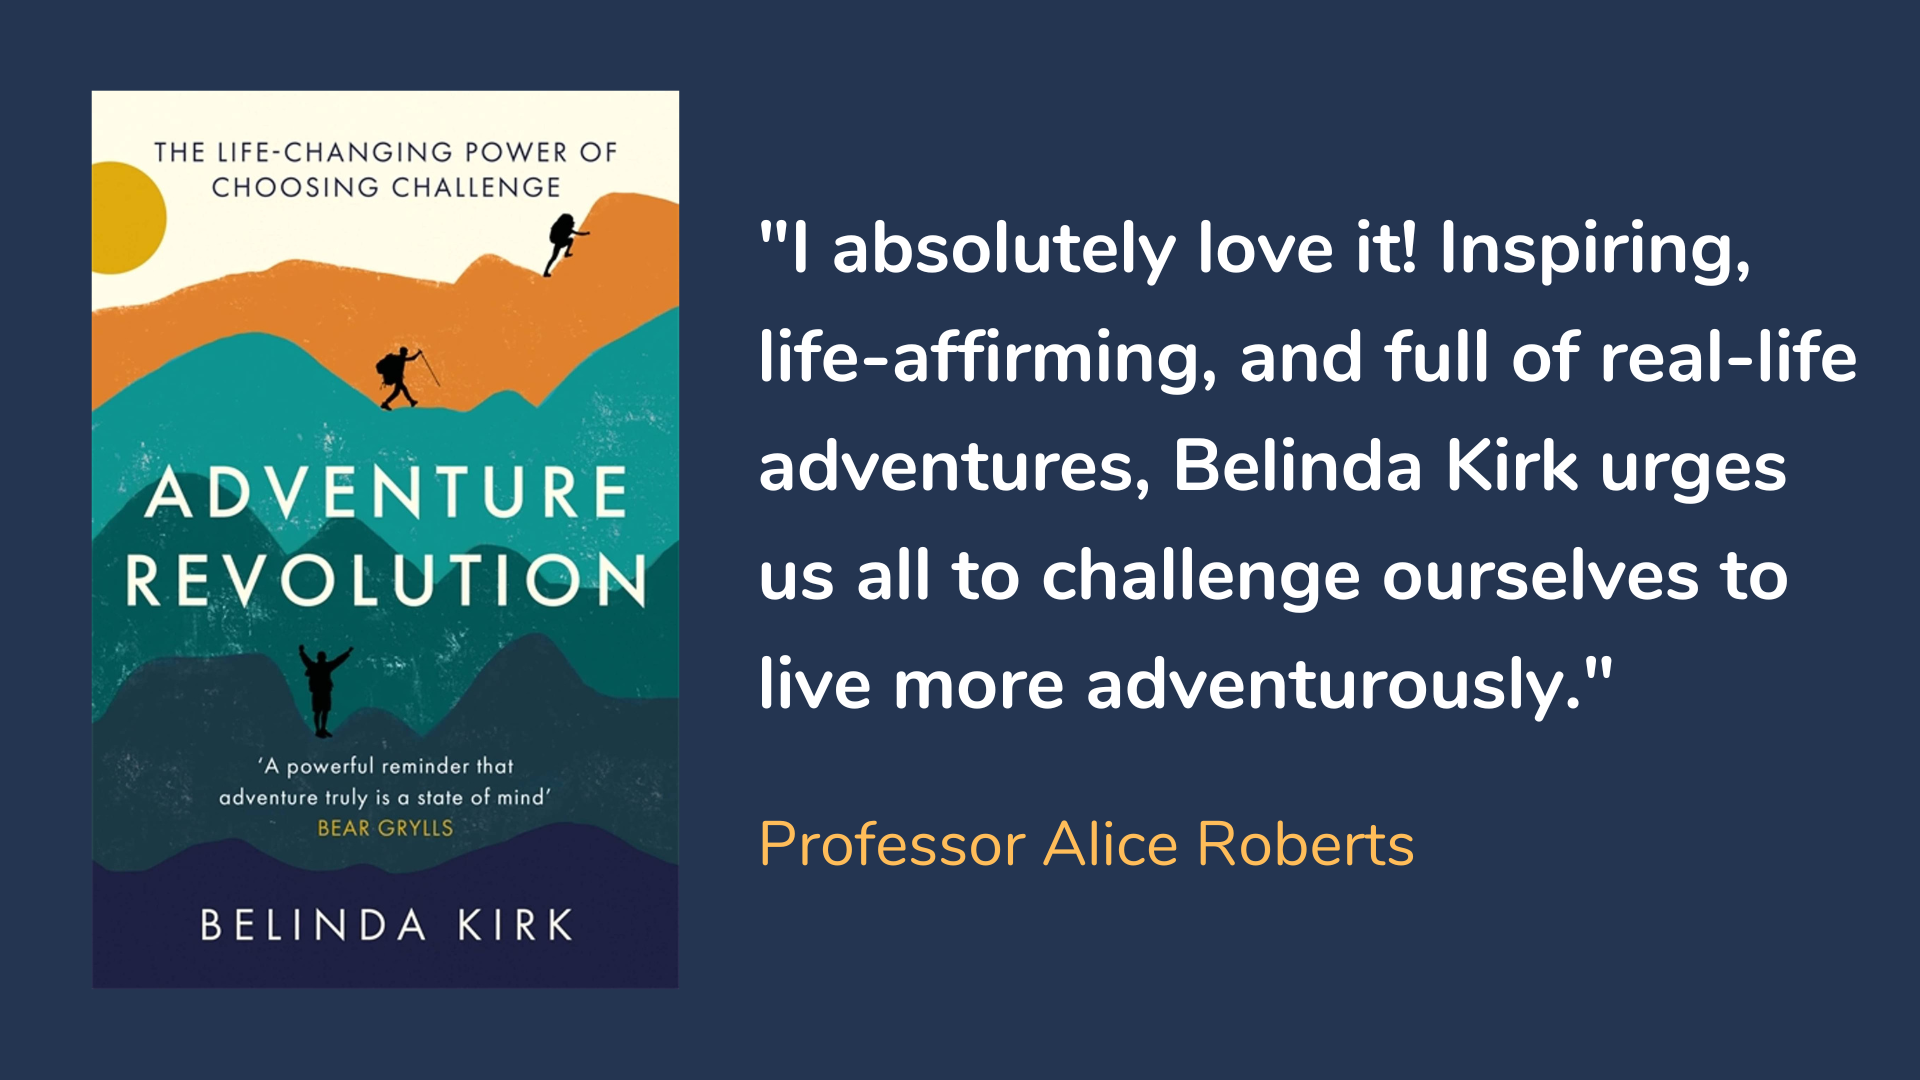 Adventure Revolution: The Life-Changing Power of Choosing Challenge, book cover and review